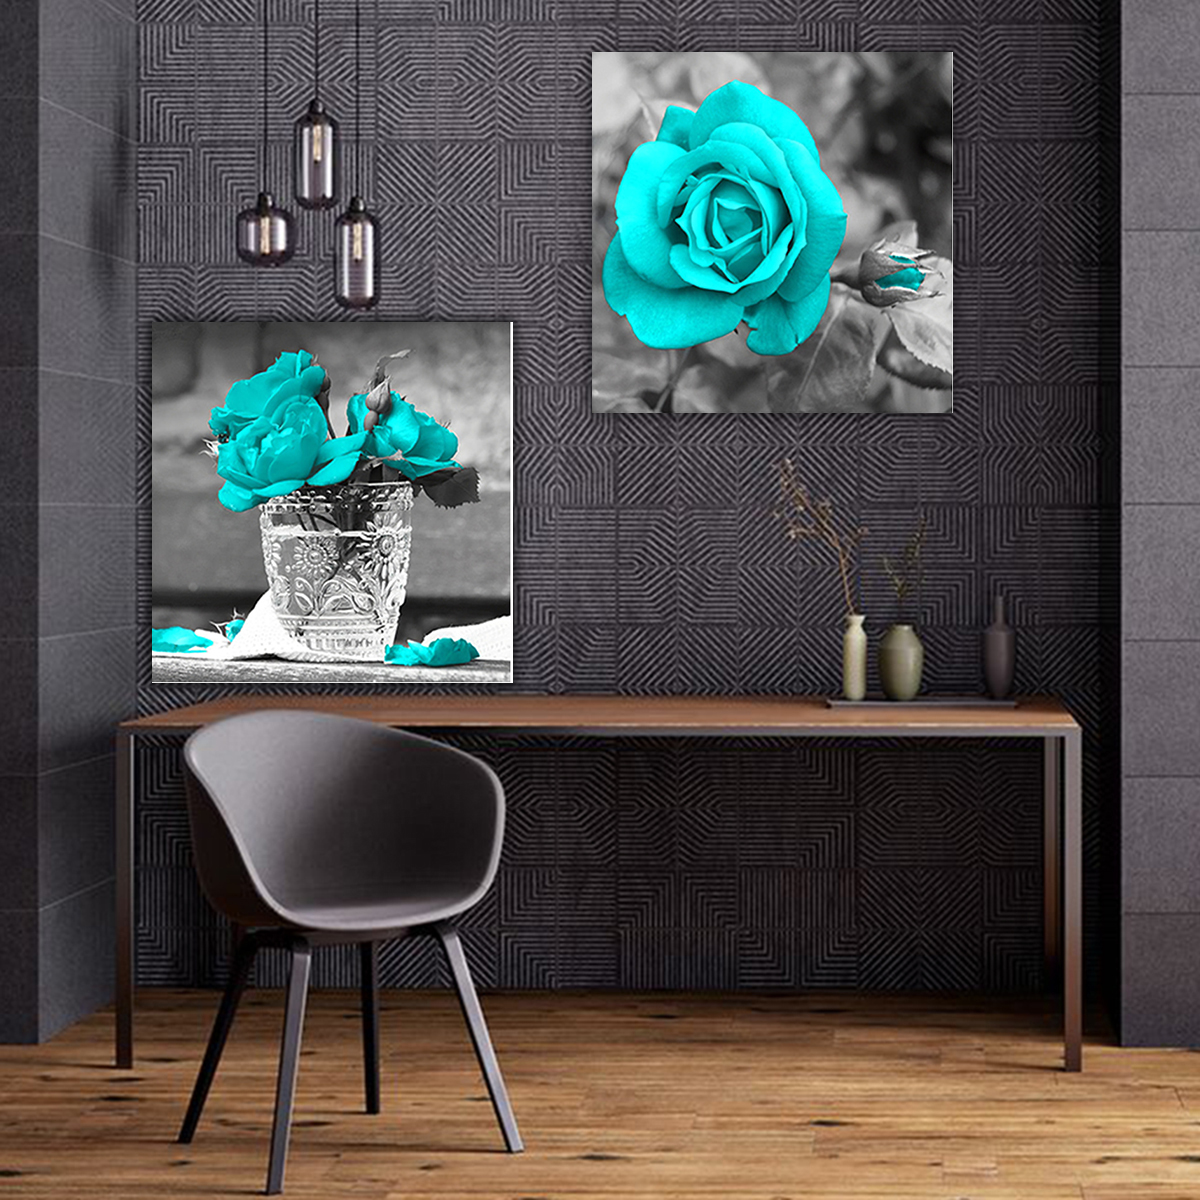 Blue-Rose-Canvas-Painting-Wall-Decorative-Print-Art-Pictures-Unframed-Wall-Hanging-Home-Office-Wall--1778176-11